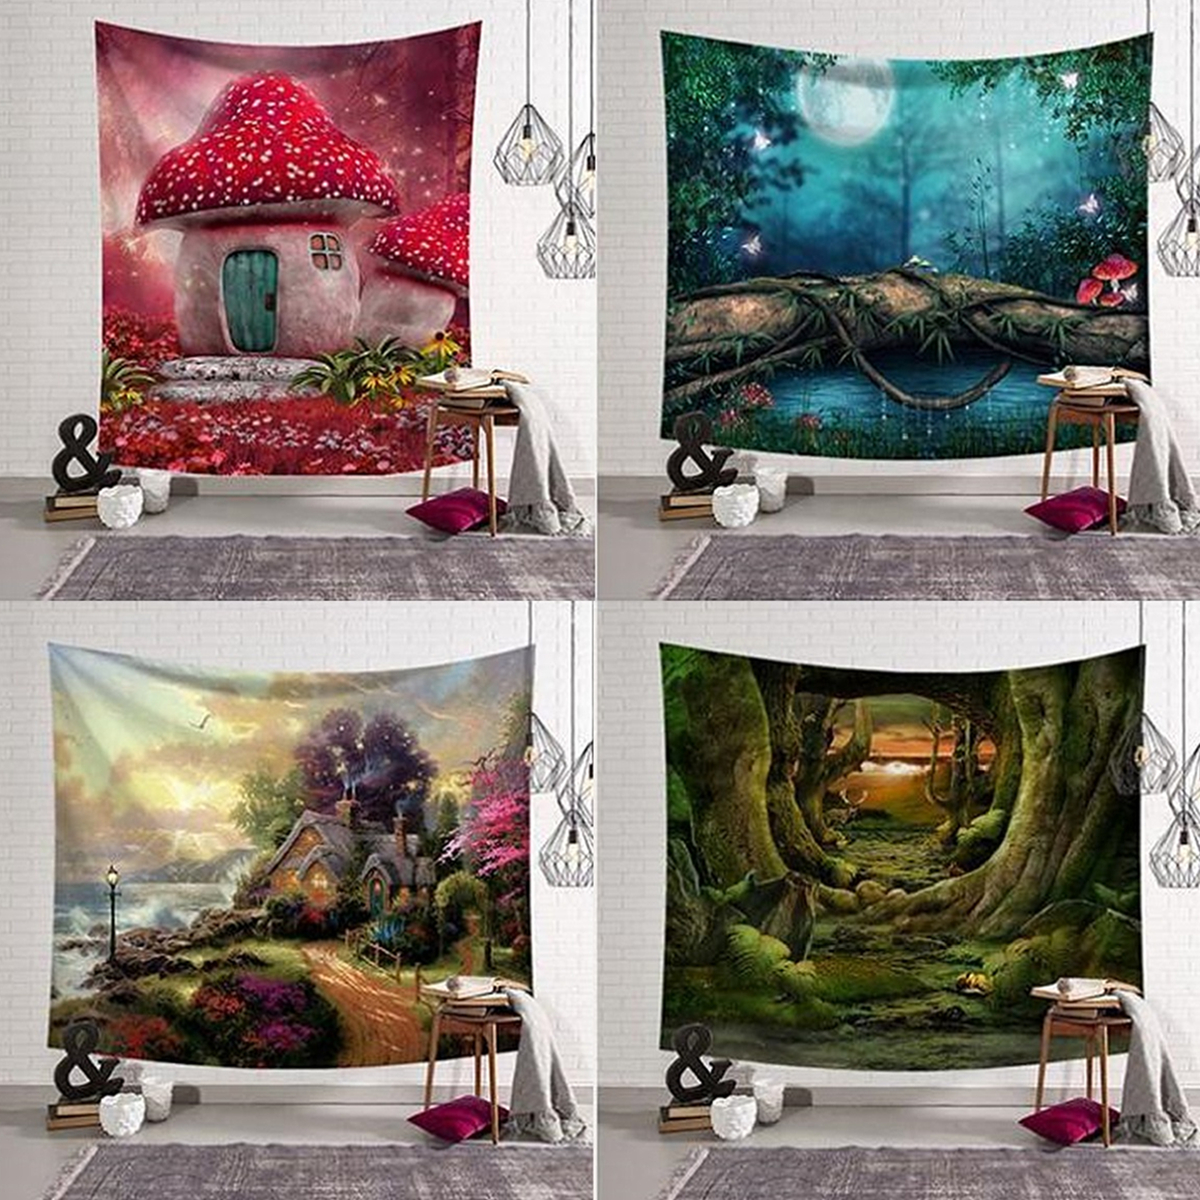 Fairy-Forest-Hanging-Wall-Tapestry-Bohemian-Hippie-Throw-Bedspread-Home-Decorations-1309251-8